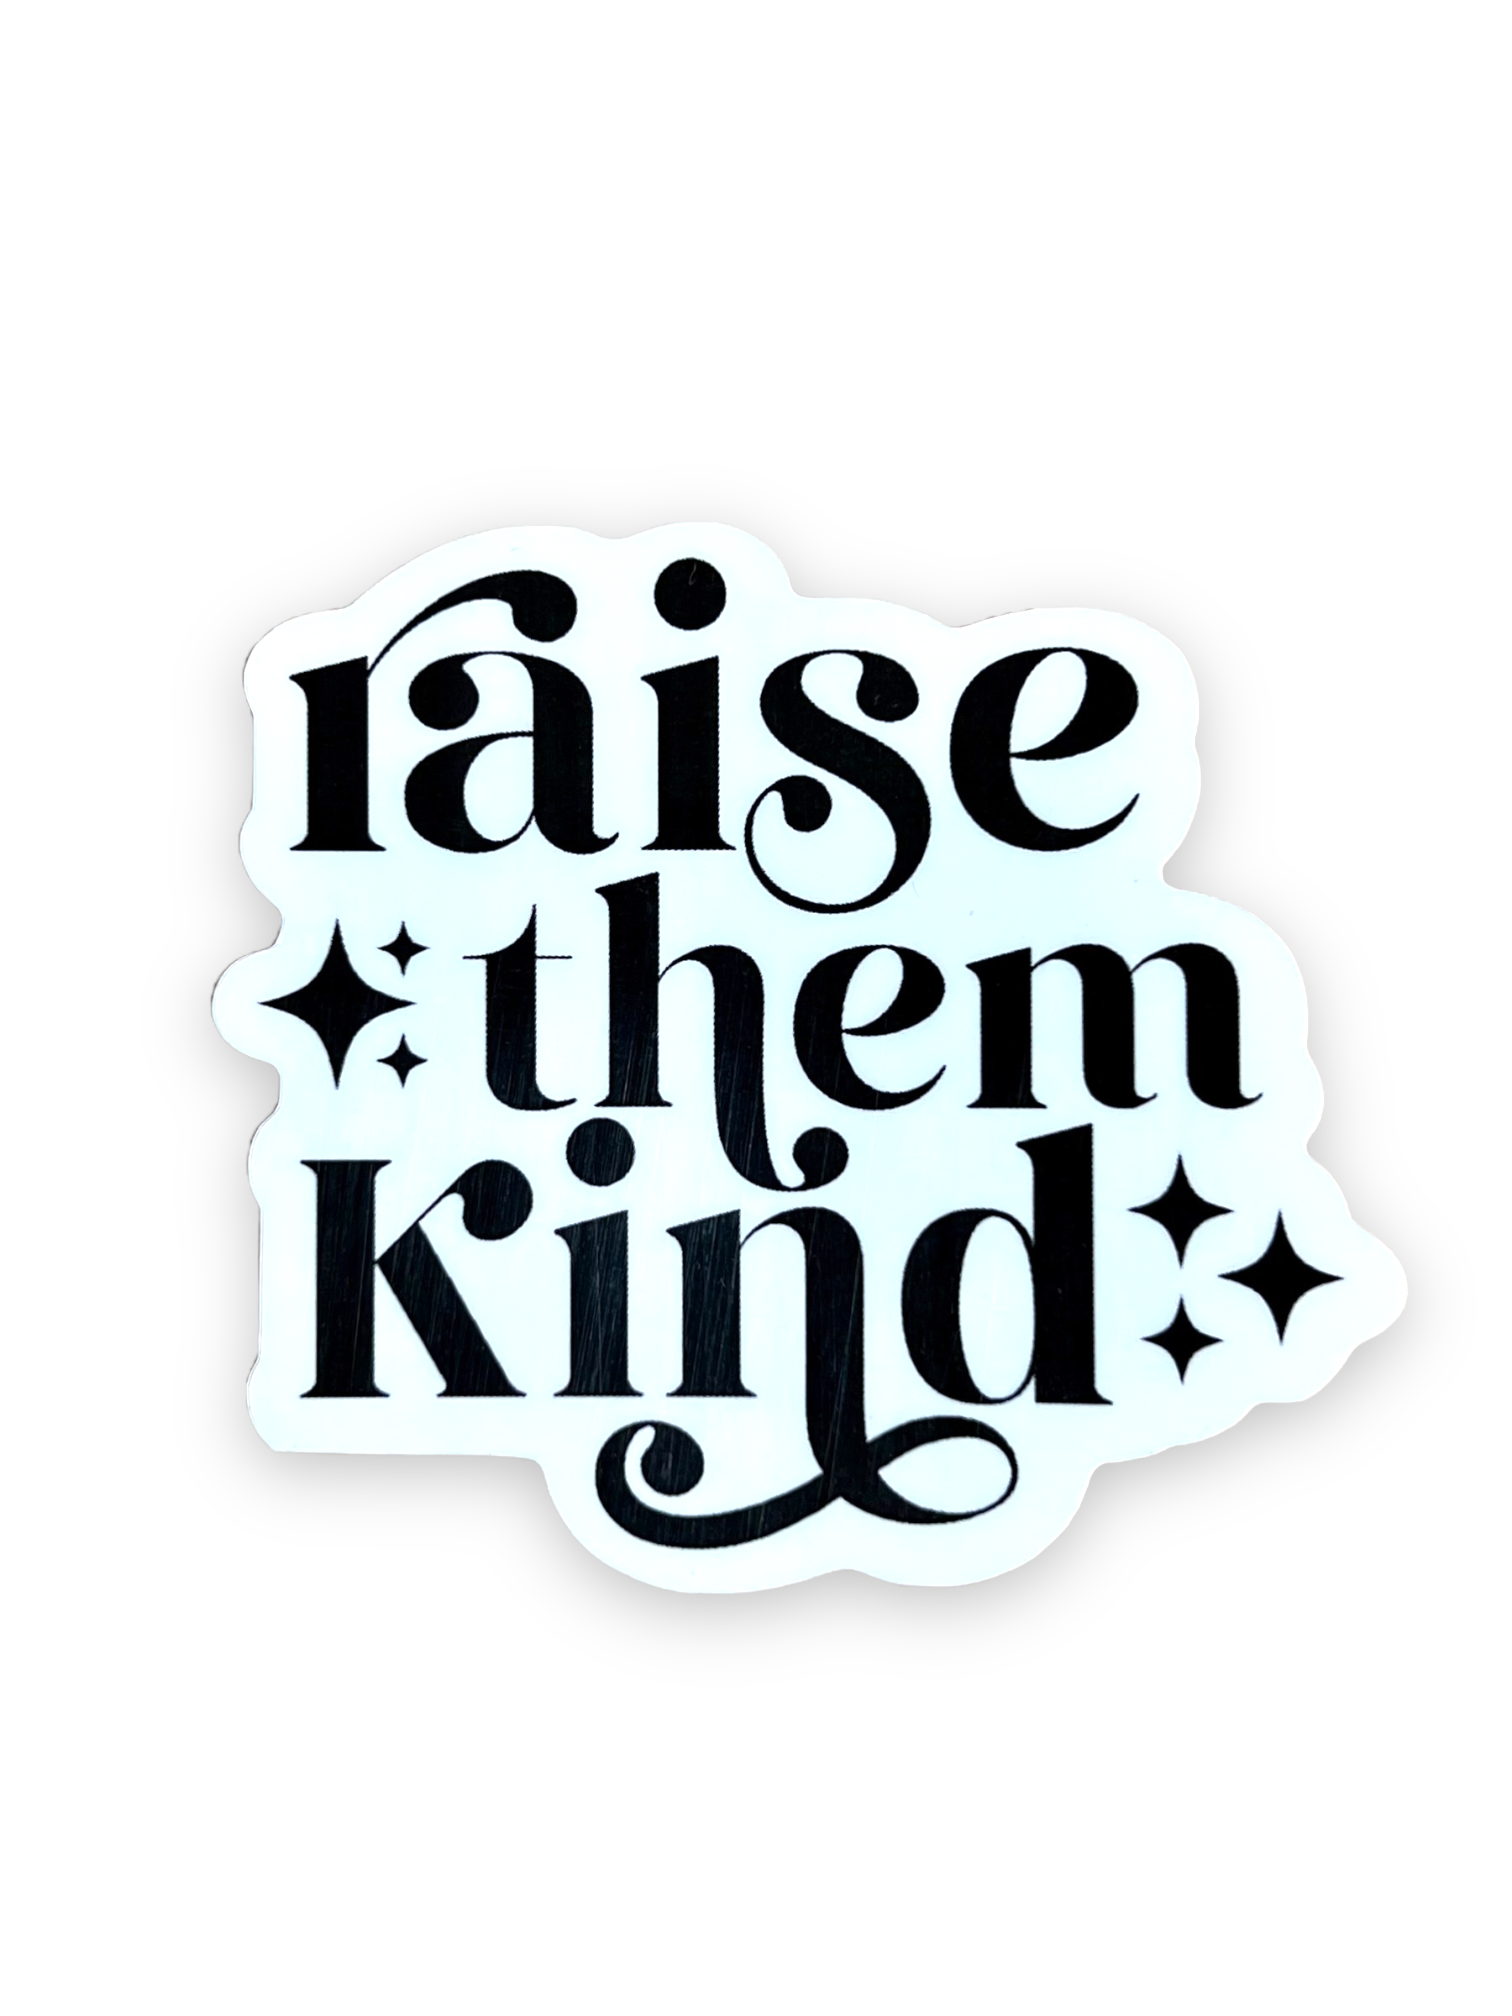 Raise Them Kind Sticker by Ace The Pitmatian Sold by Le Monkey House